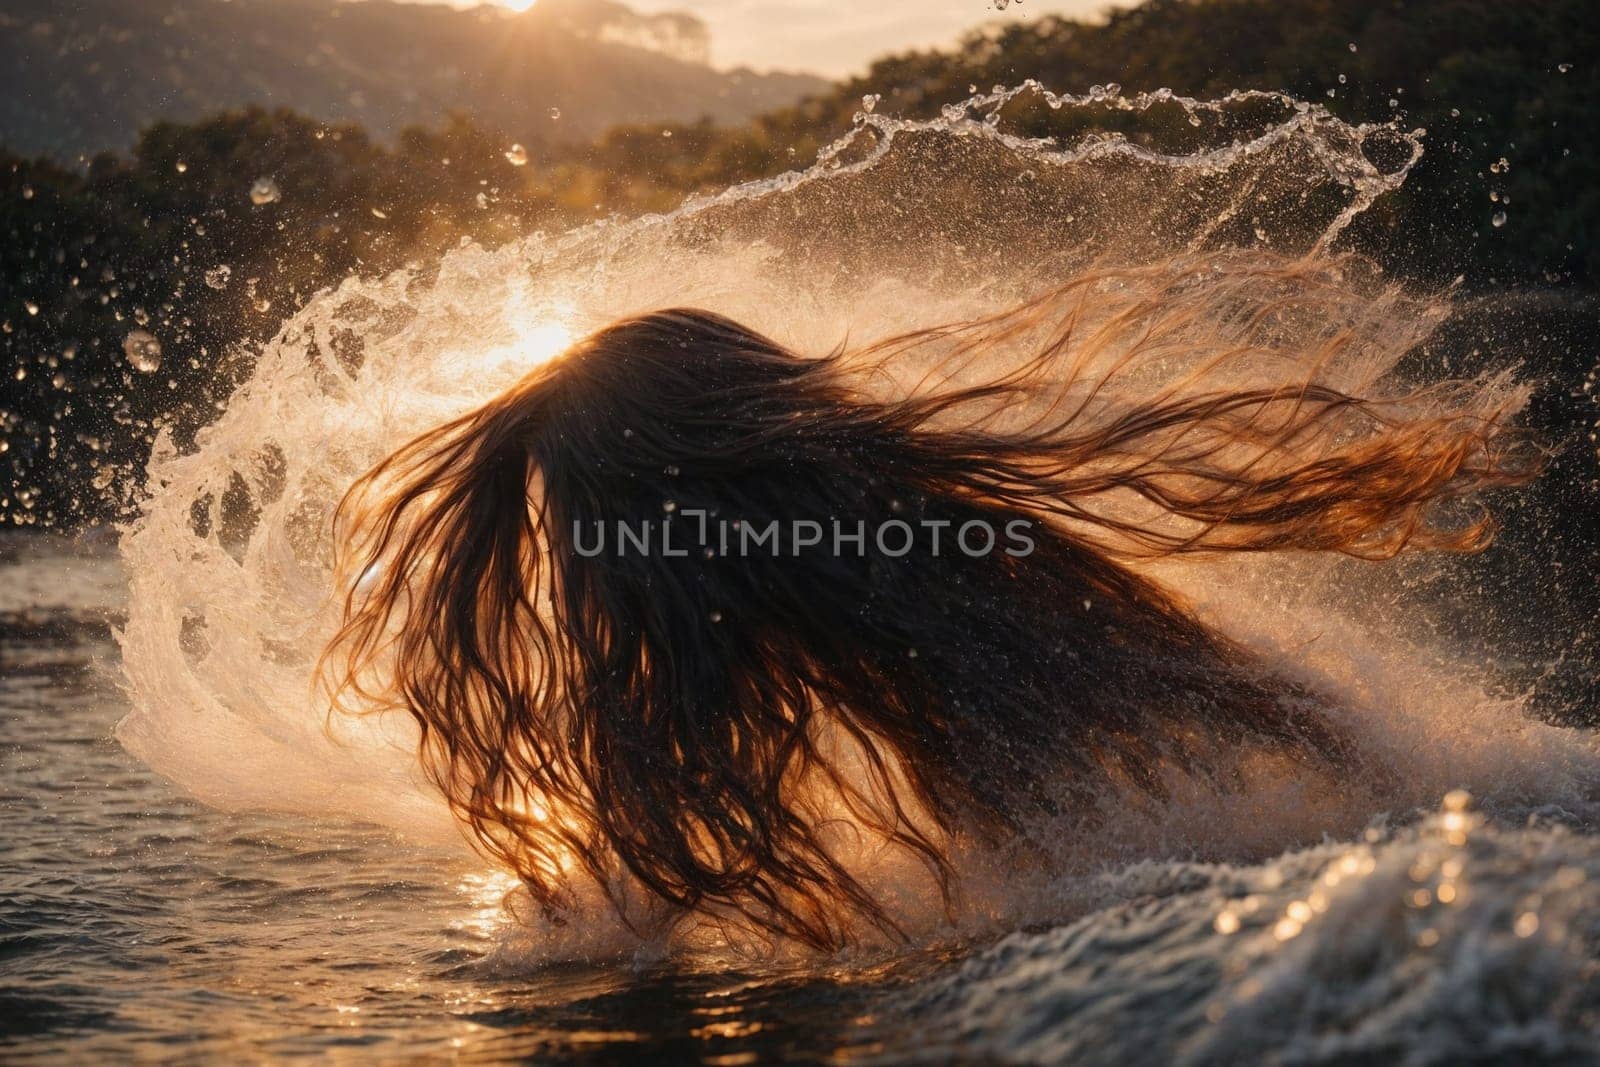 A woman is seen submerged in water with her hair floating in the air.